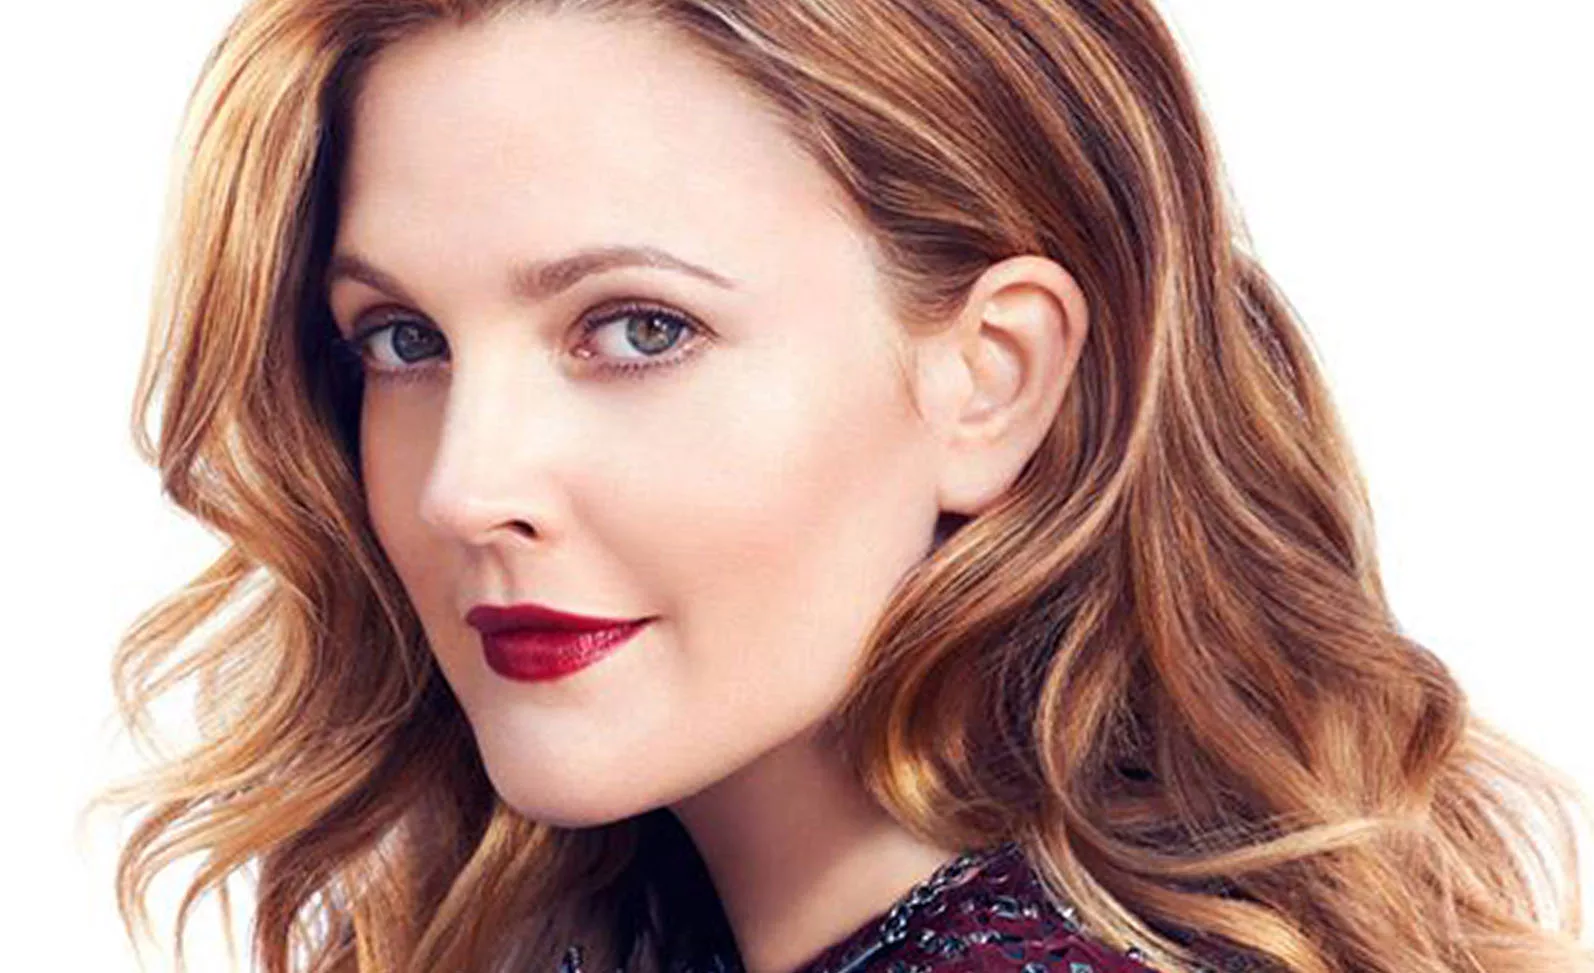 PICS Movie Actress Drew Barrymore Naked Leaked Photos - Fappening Sauce